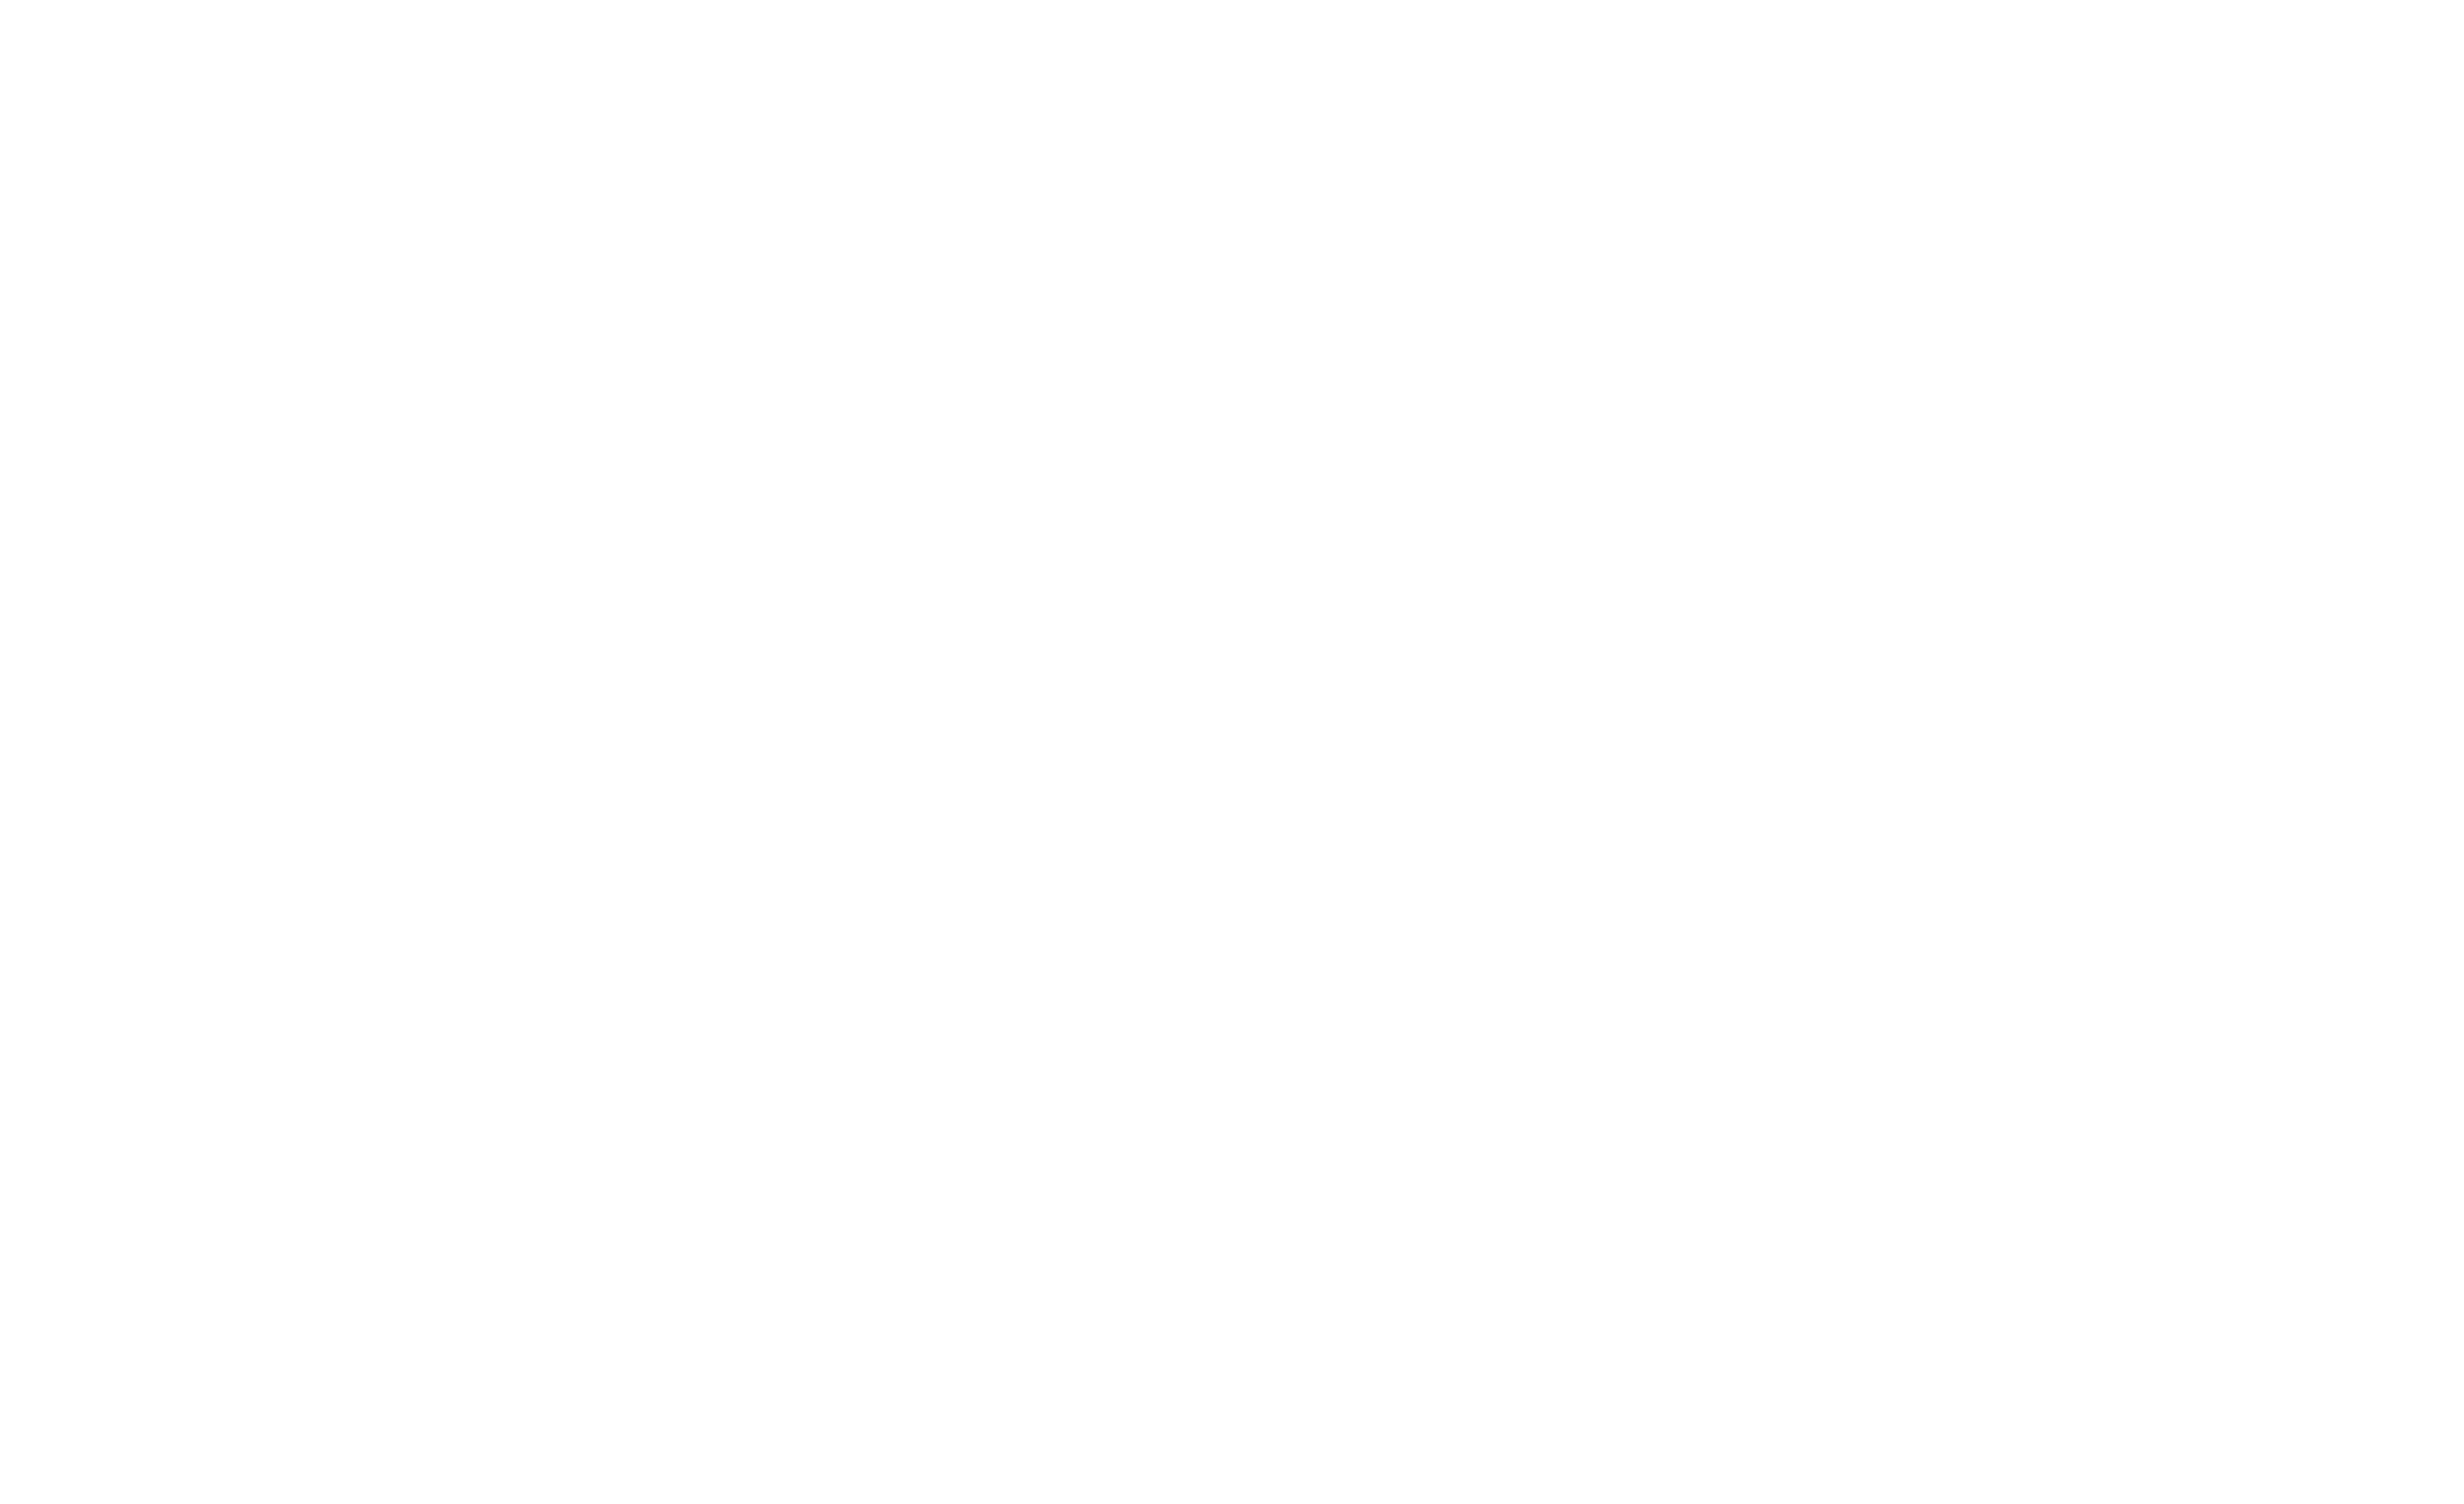 2022-NAFF-official-selection-white.png